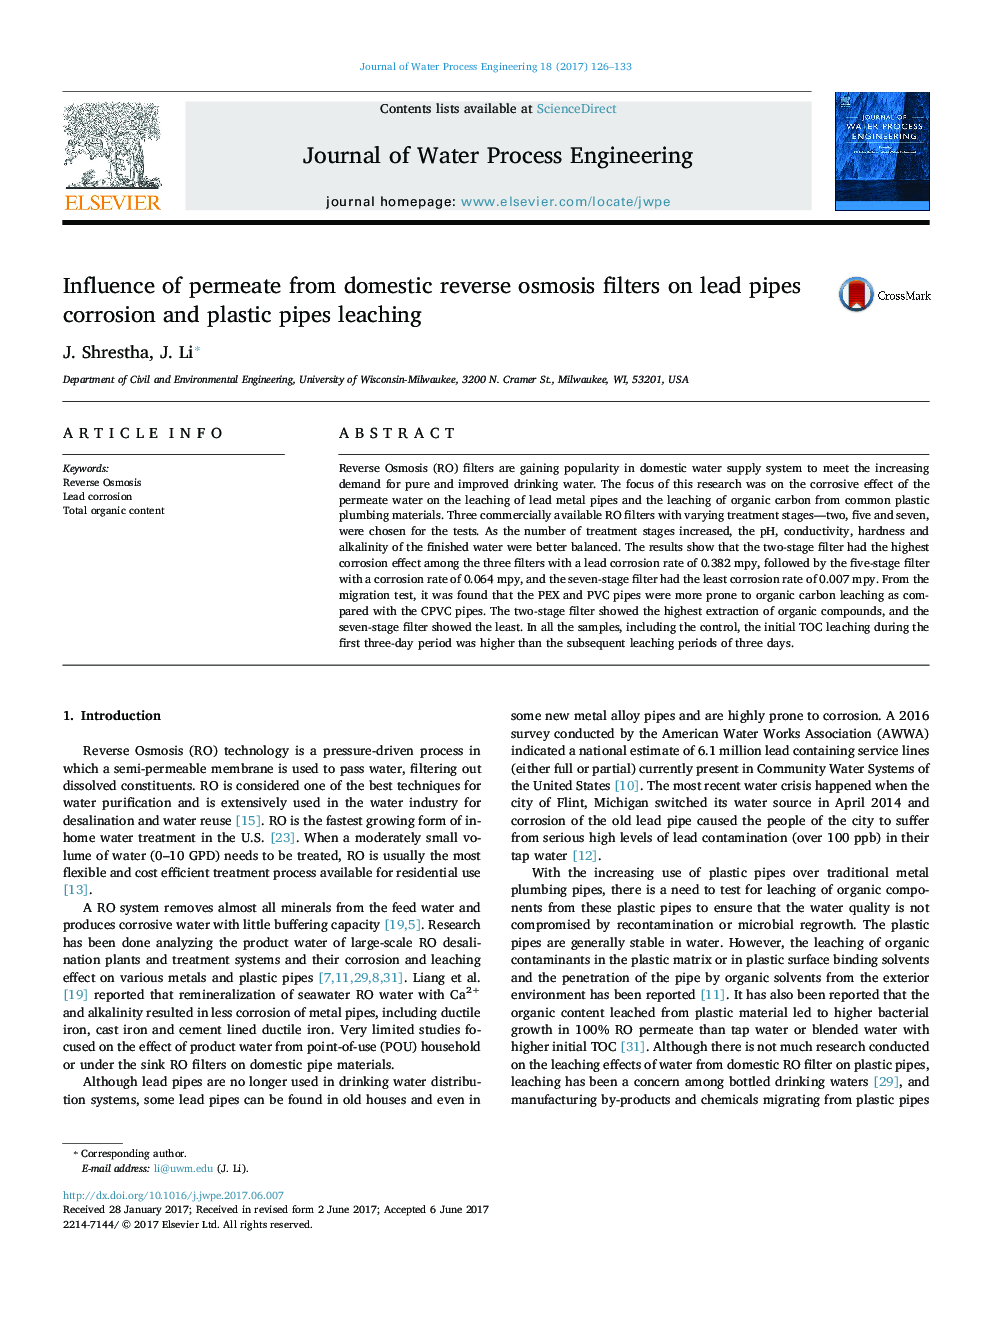 Influence of permeate from domestic reverse osmosis filters on lead pipes corrosion and plastic pipes leaching